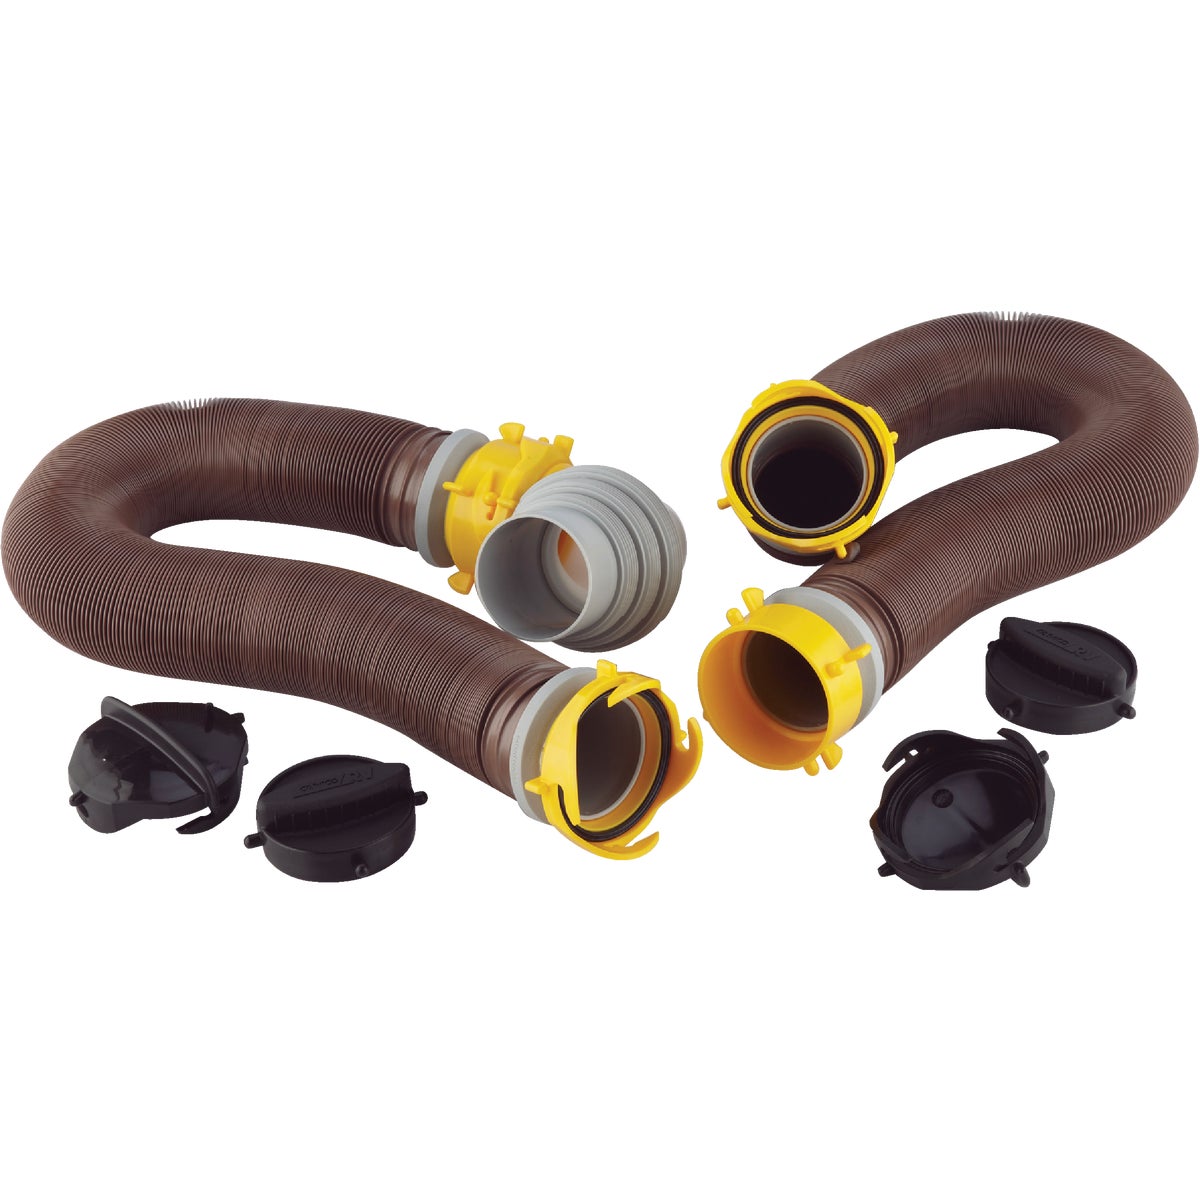 Item 576870, Complete hose kit comes with everything needed for a quick, reliable hook-